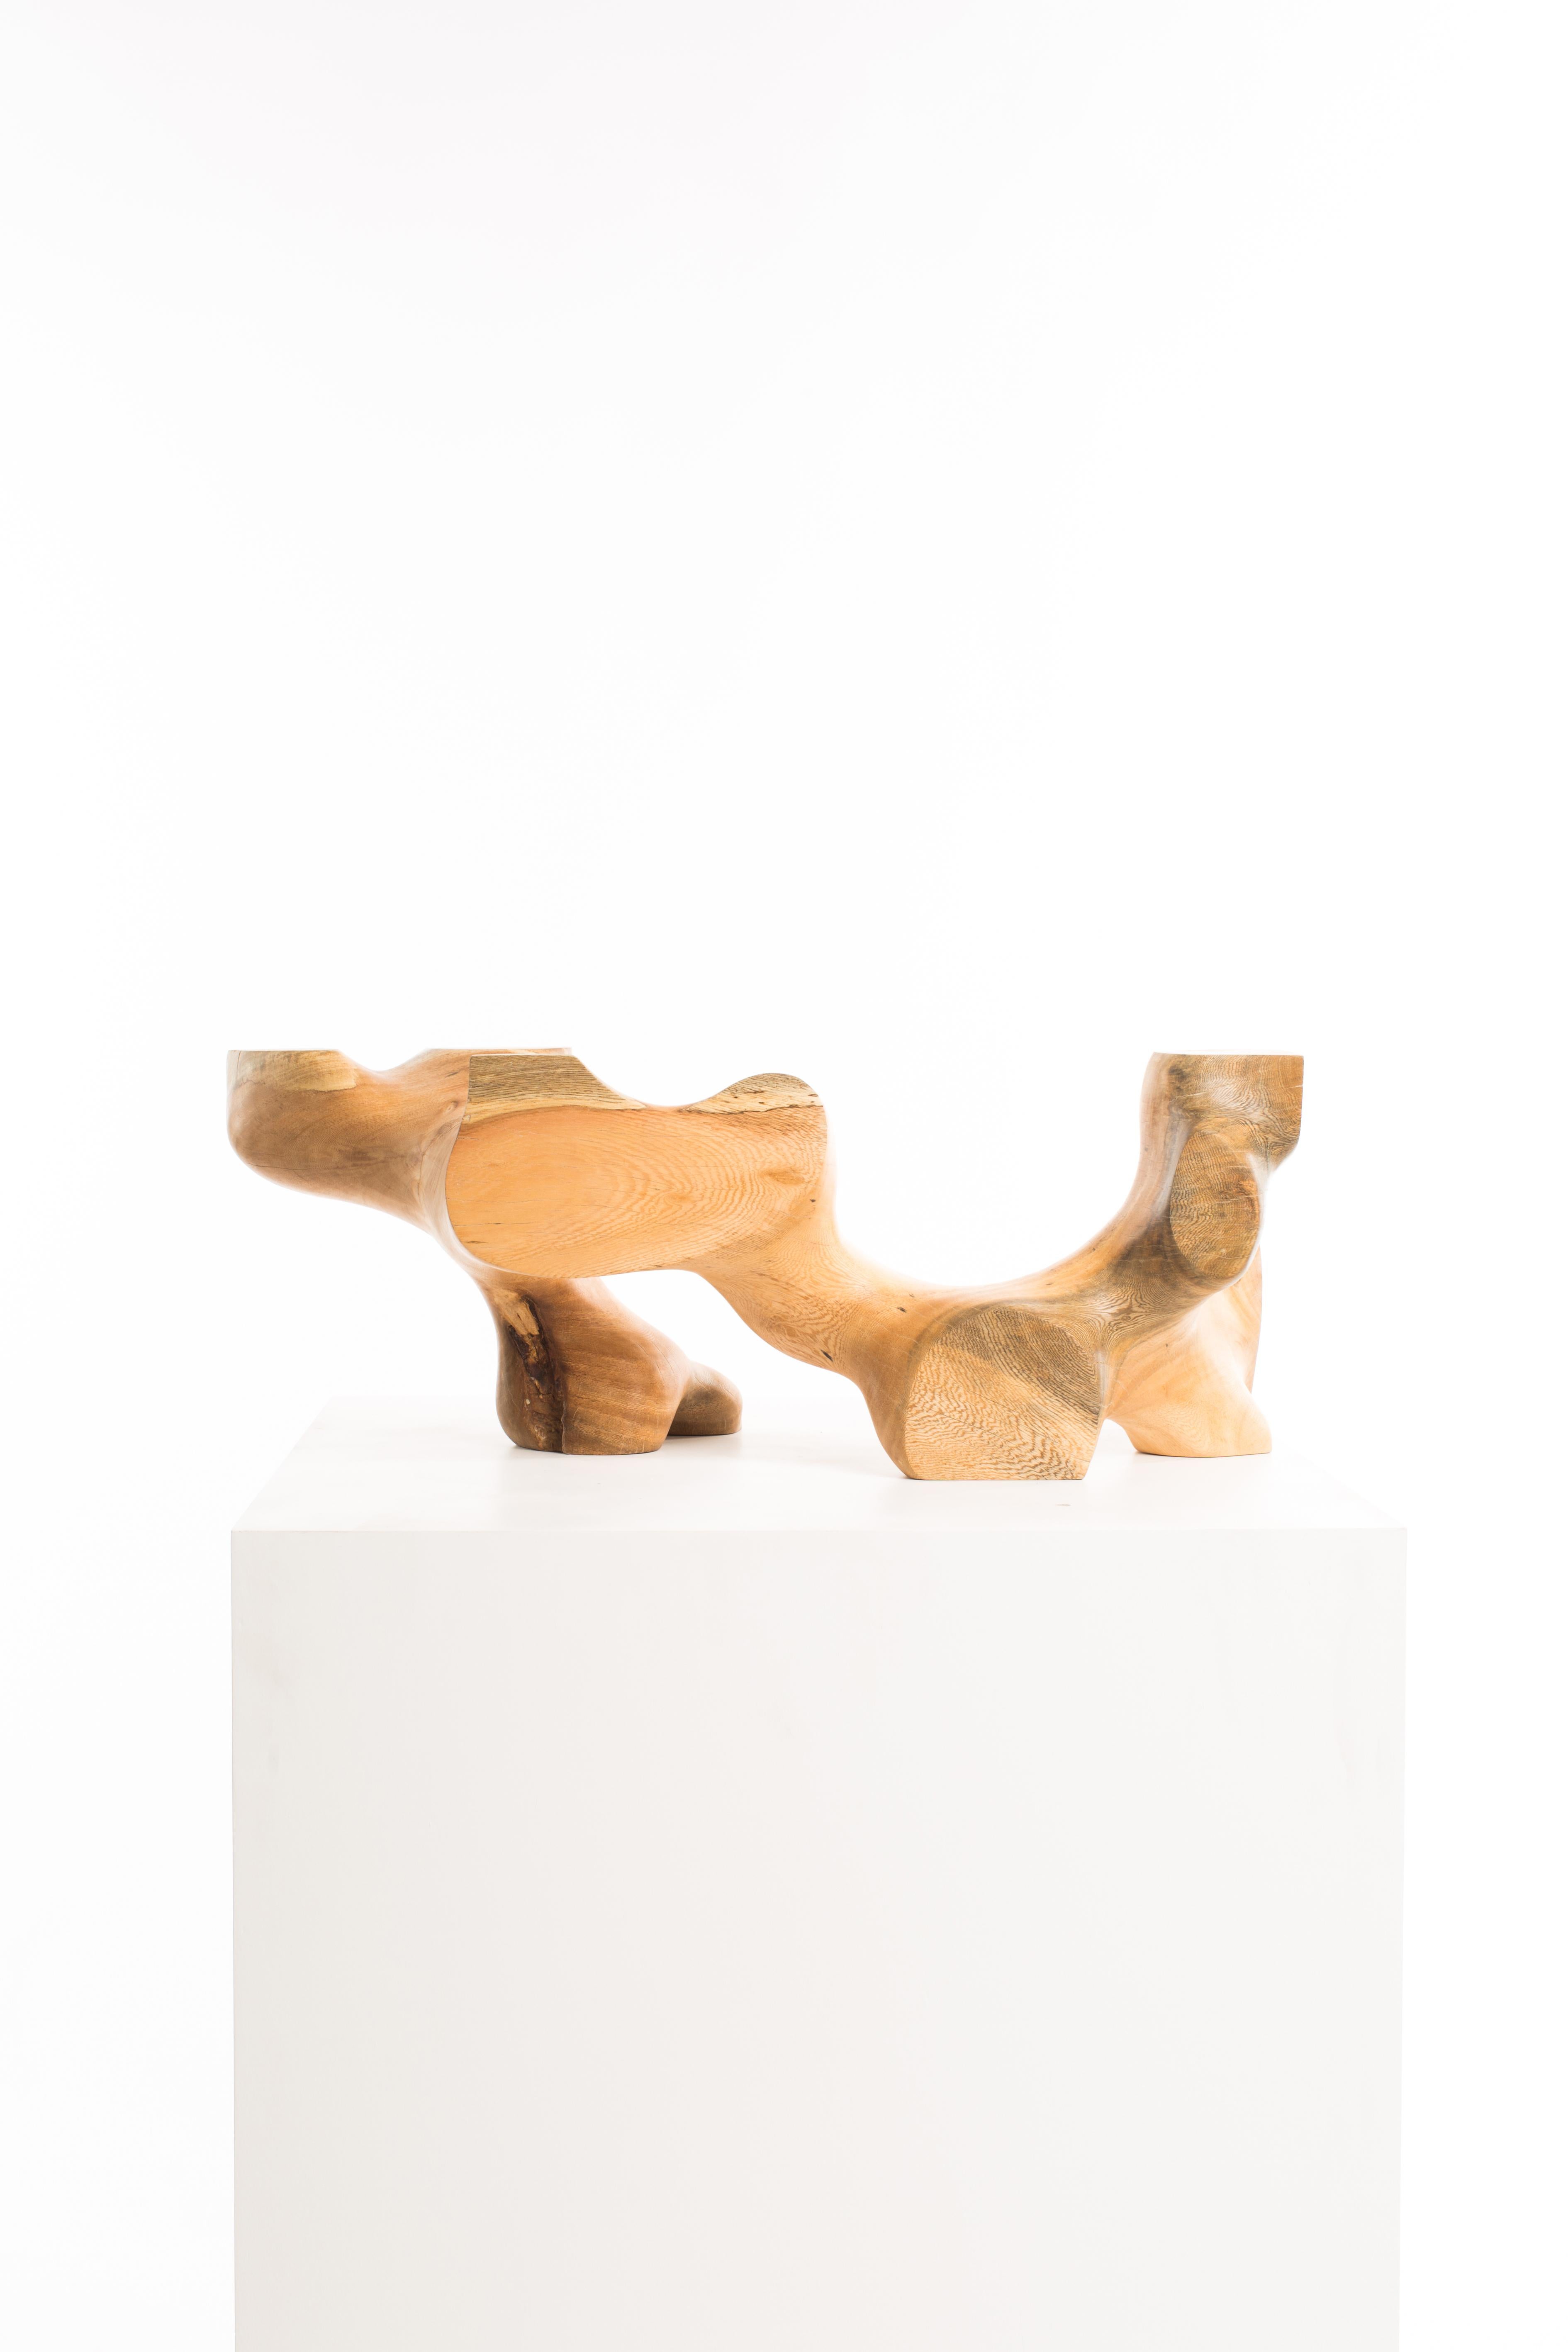 Wooden Cuboid 008 
1/1
Ficus
30cm x 30cm x 80cm 
10.8Kg
2020

Crystalized Sculptures is an abstracted exploration of marks left on the physical mind by experiences of emotion and feelings. In Driaan Claassens' work, where whisps portray the